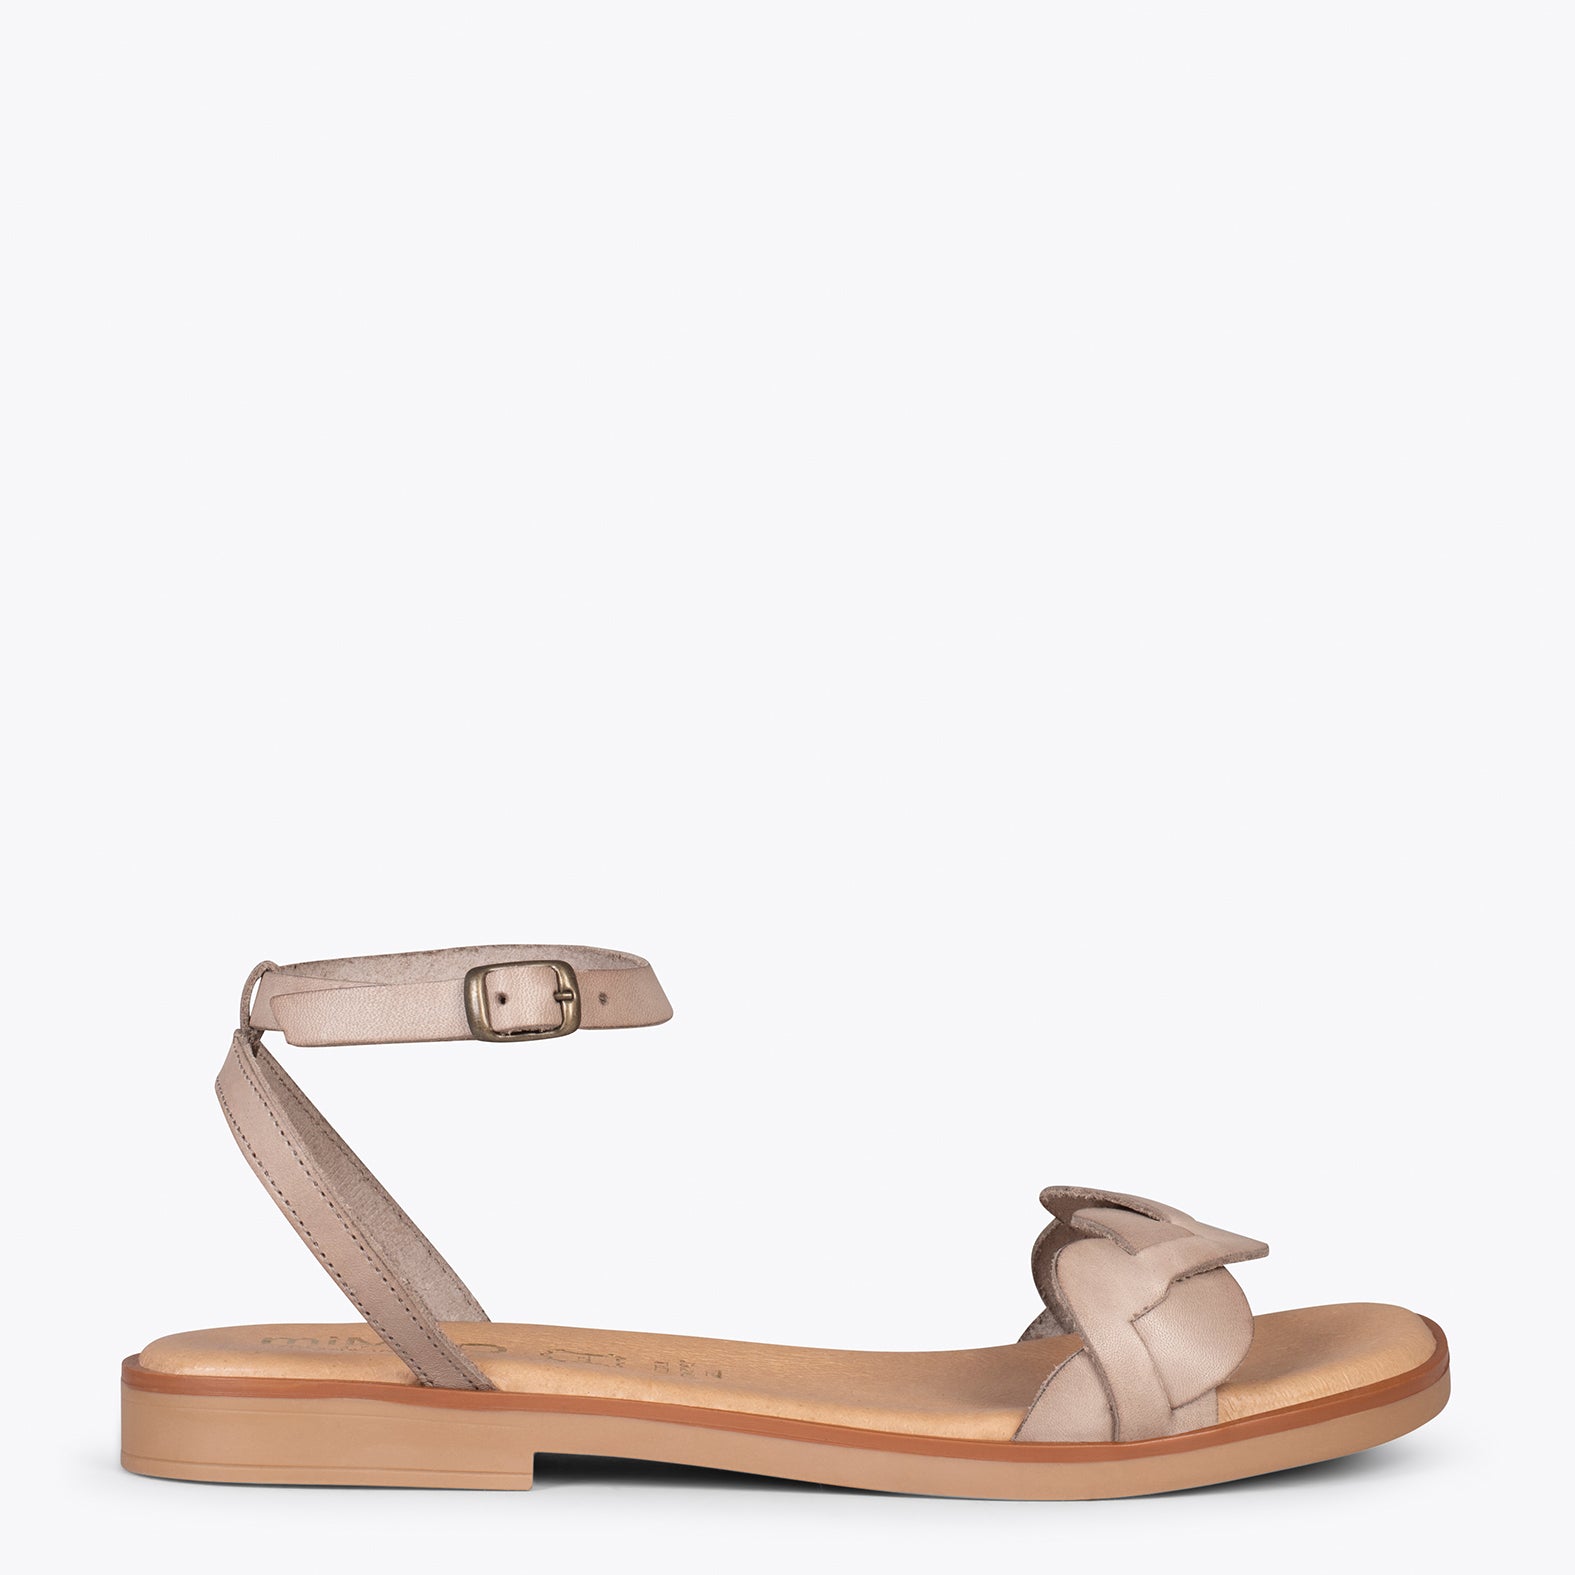 ARECA – TAUPE flat sandal with braided upper